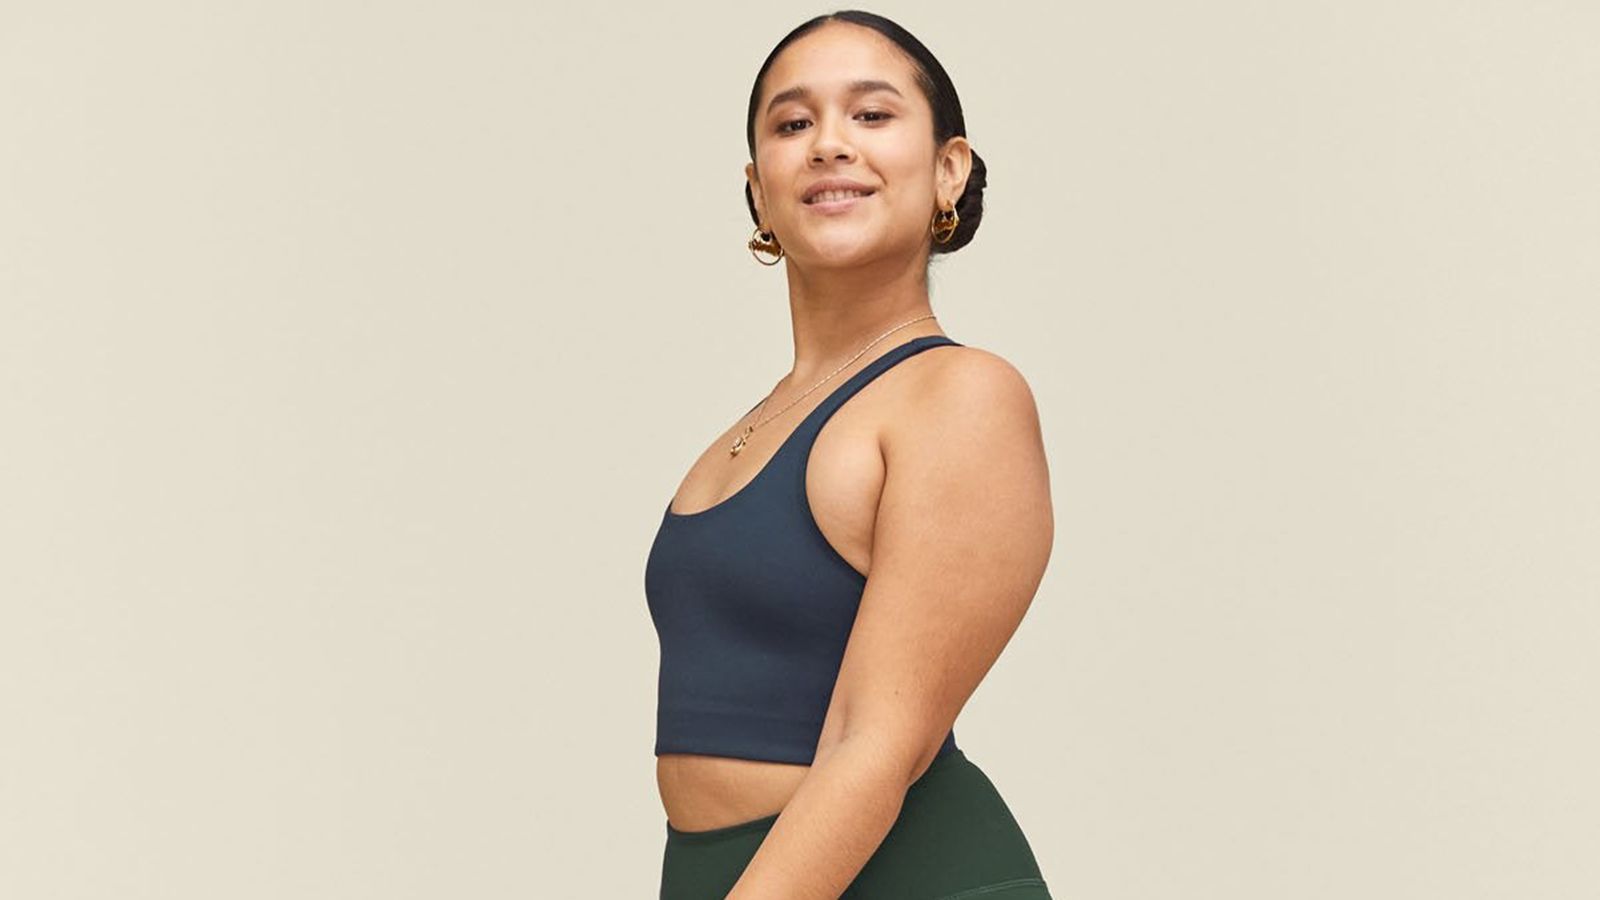 10 Best Sports Bras for Comfort and Support 2021